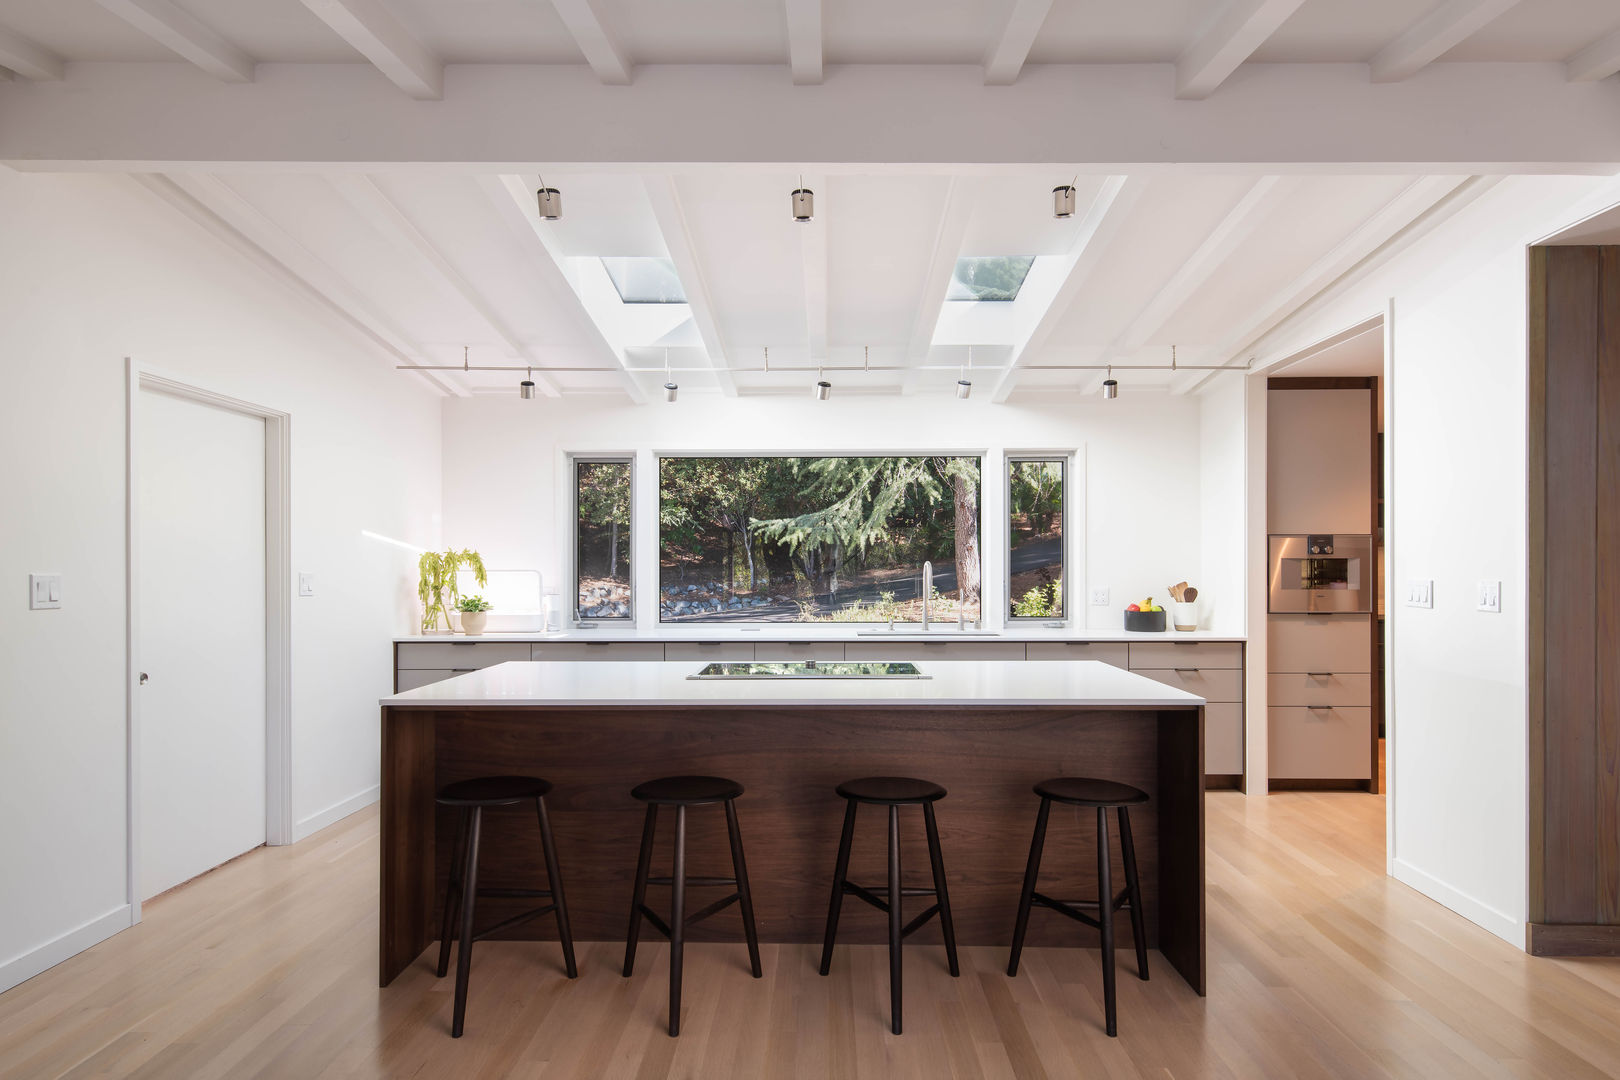 Lafayette Modern Remodel by Klopf Architecture, Klopf Architecture Klopf Architecture Cucina moderna